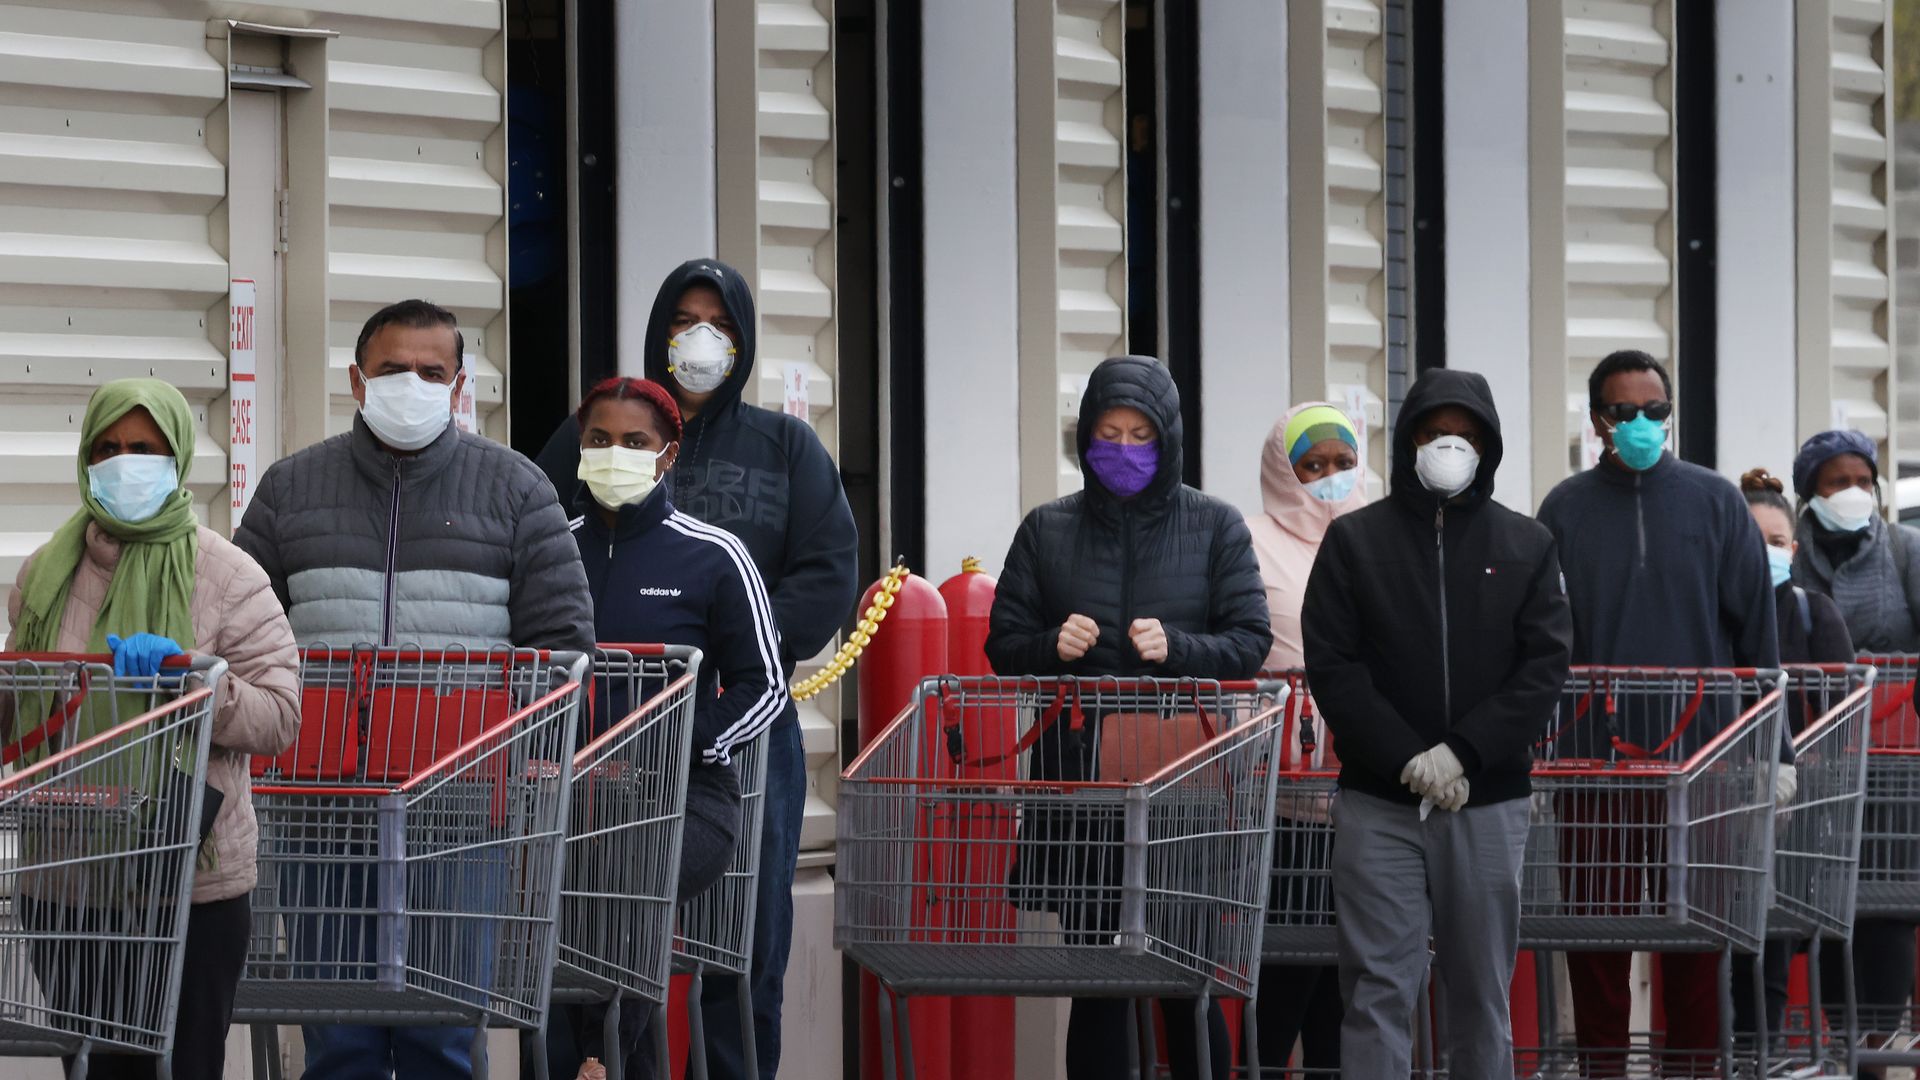 Customers with shopping carts wear face masks while in line to enter a grocery store